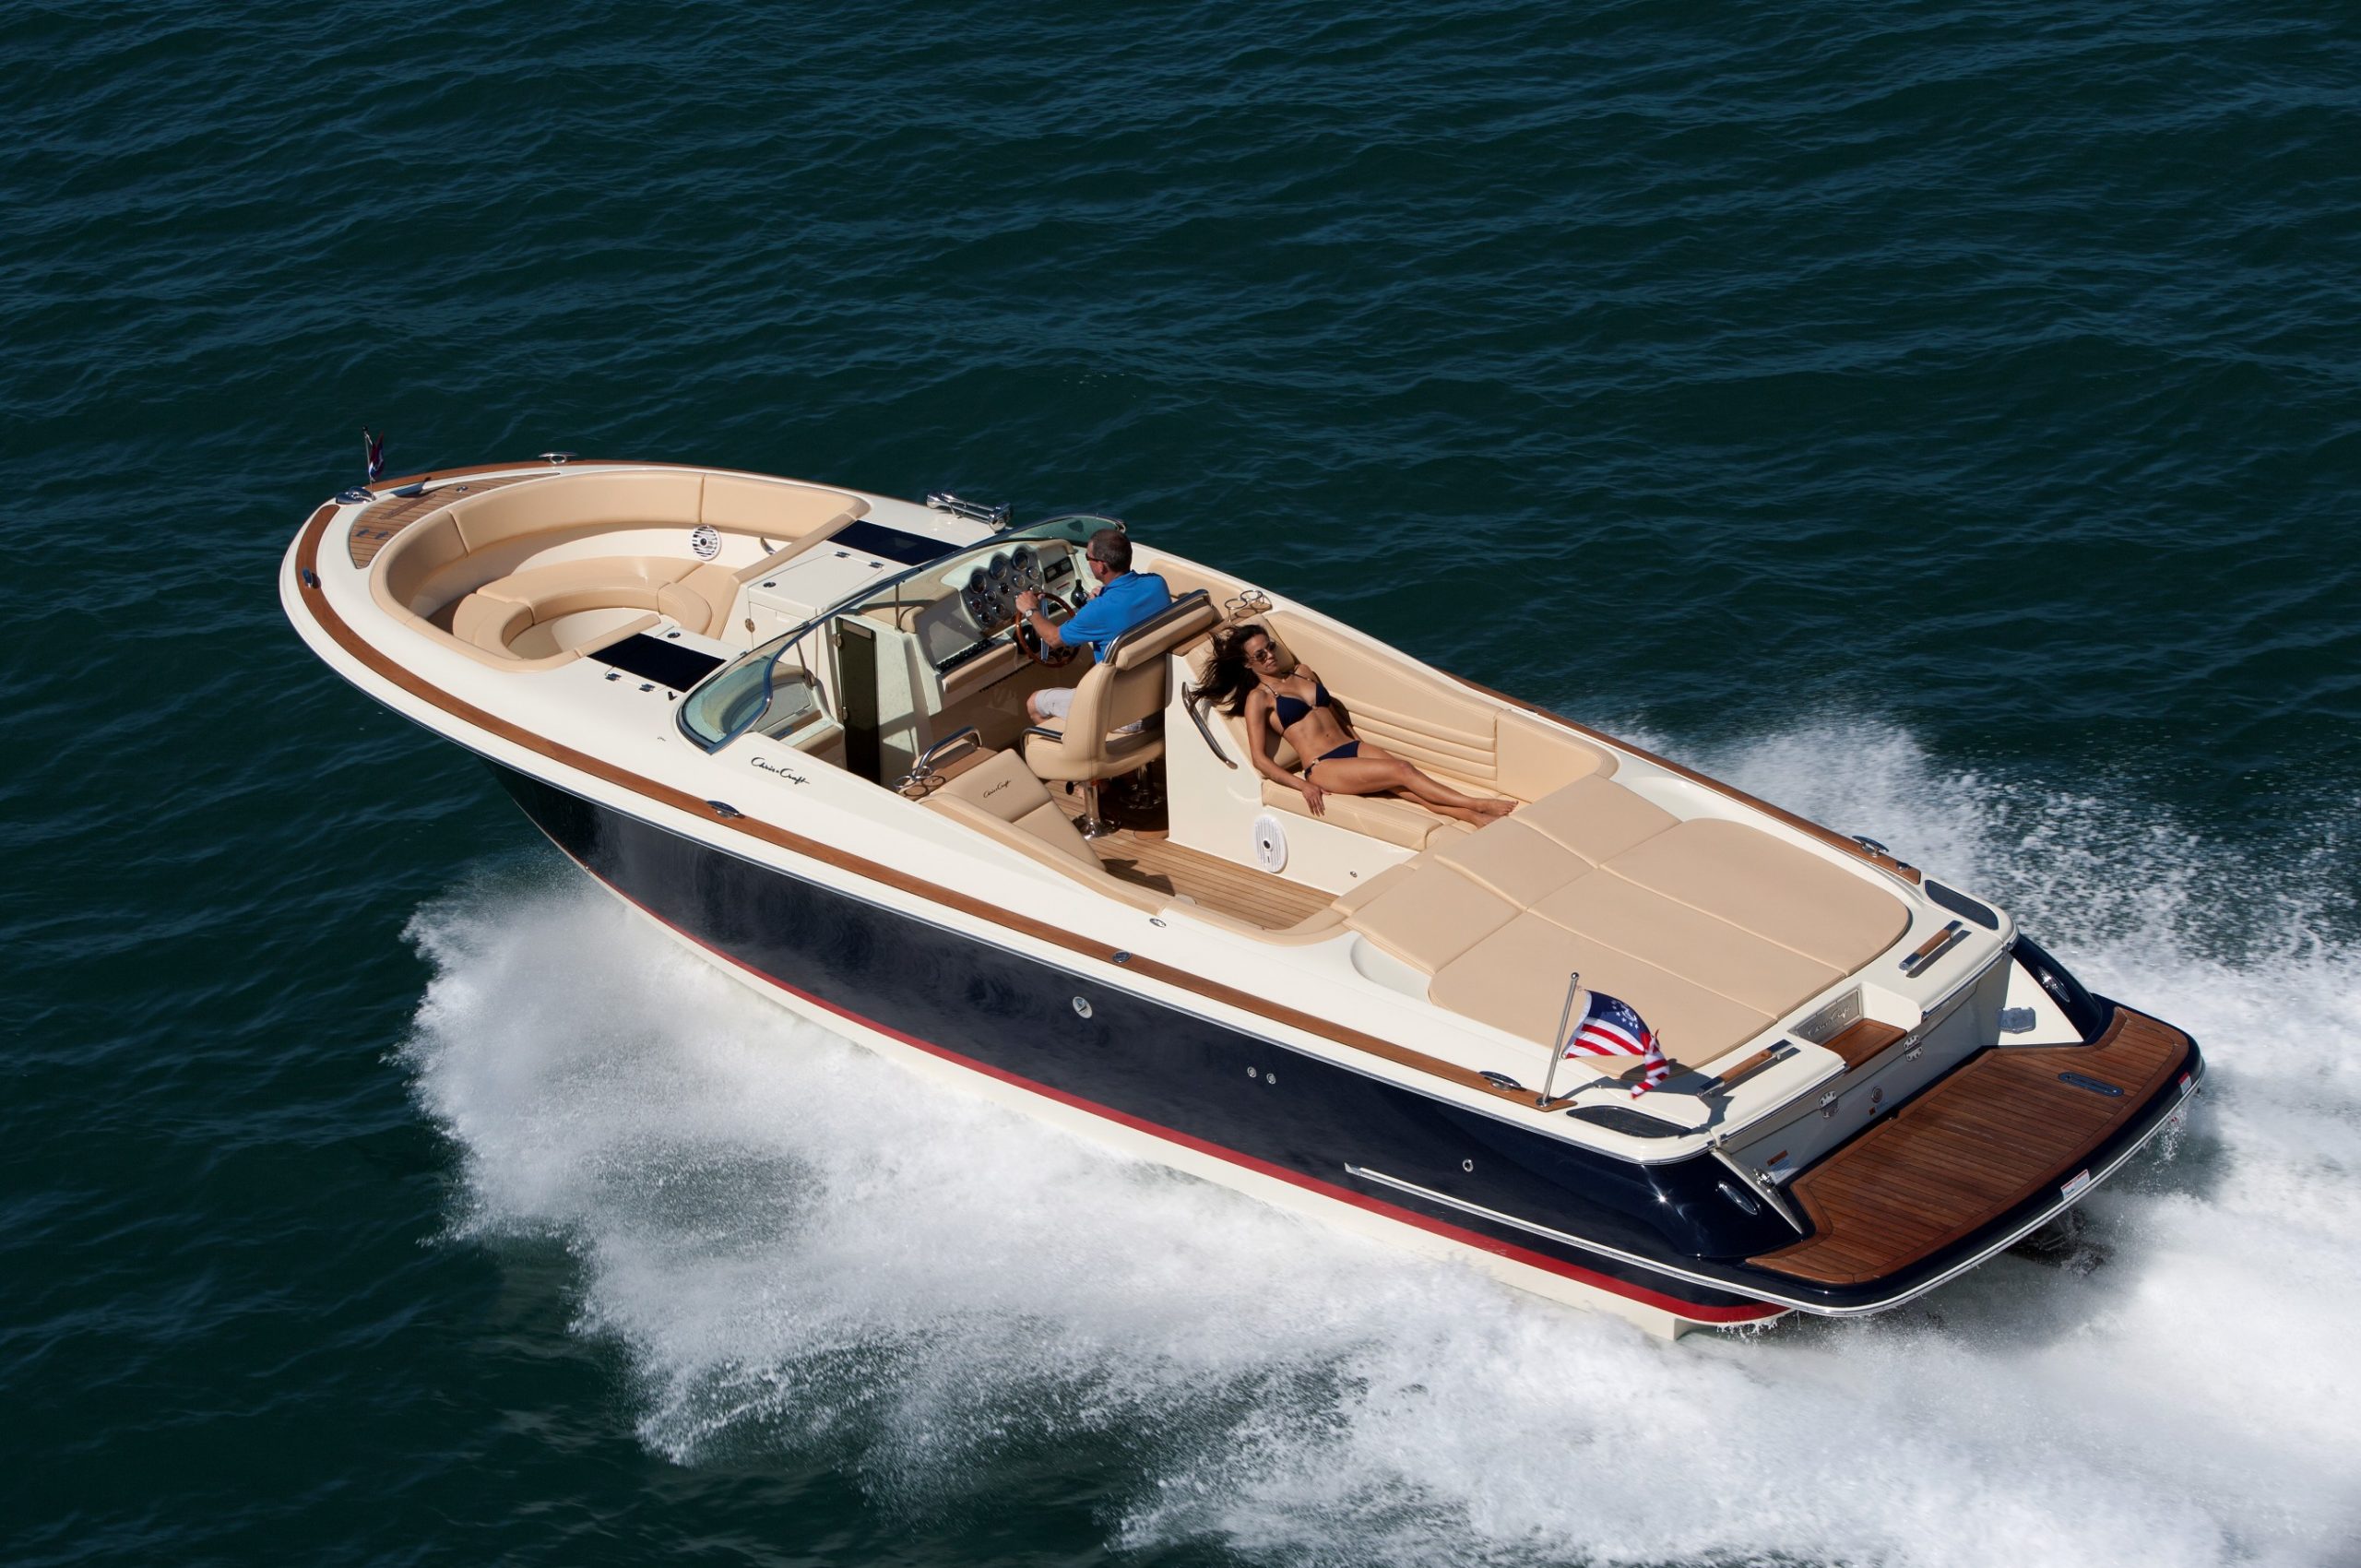 Chris Craft: A Comprehensive Guide to Timeless Classic Boats